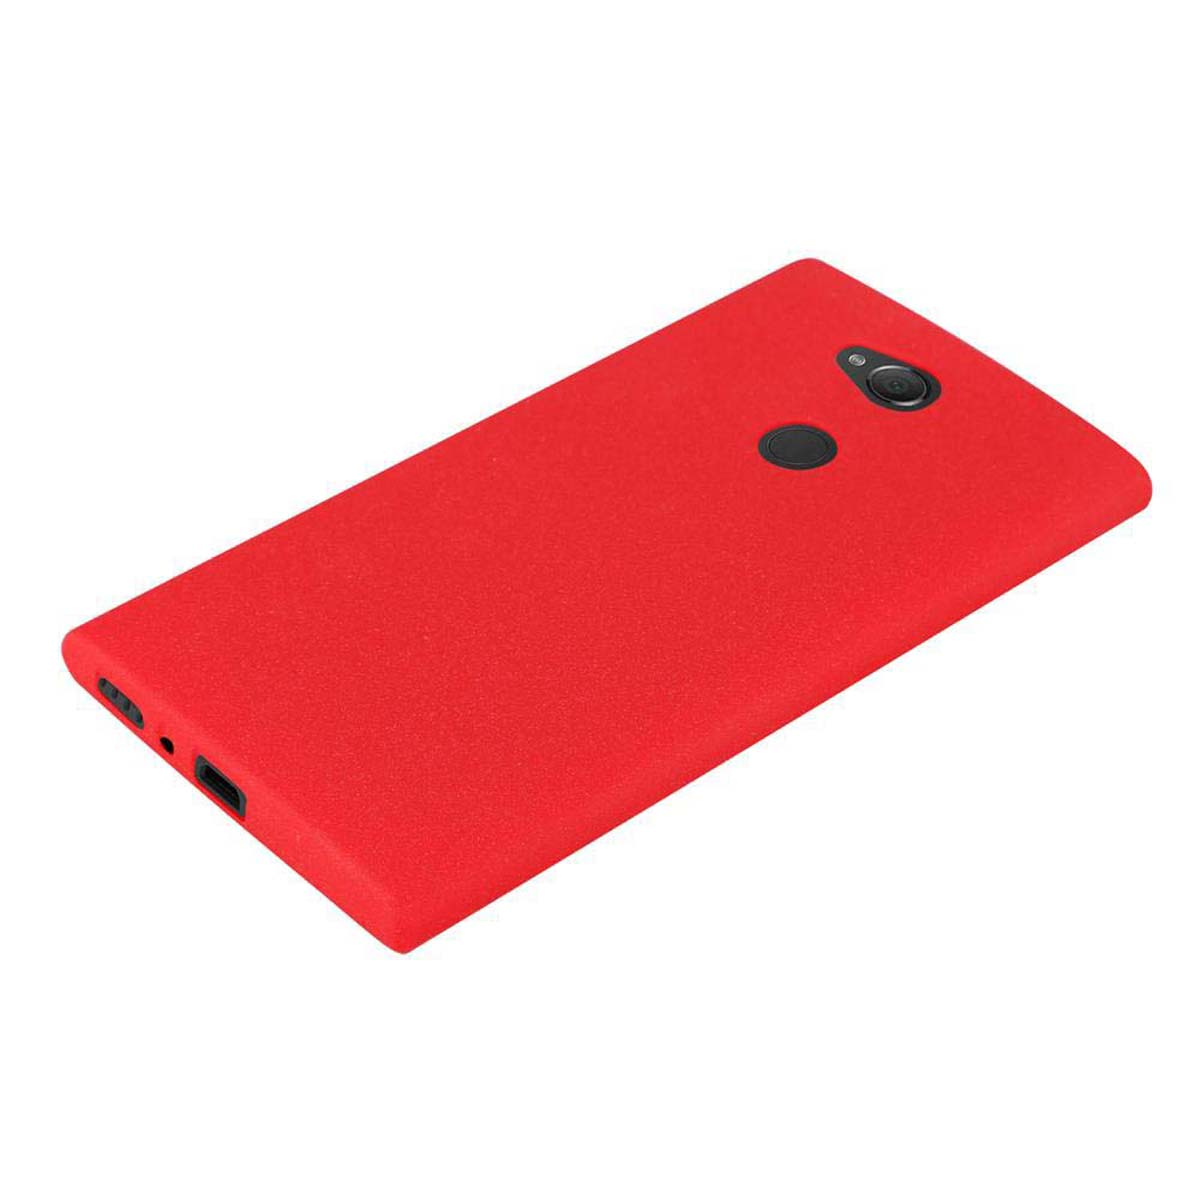 Sony, Frosted TPU L2, ROT FROST Xperia Schutzhülle, Backcover, CADORABO